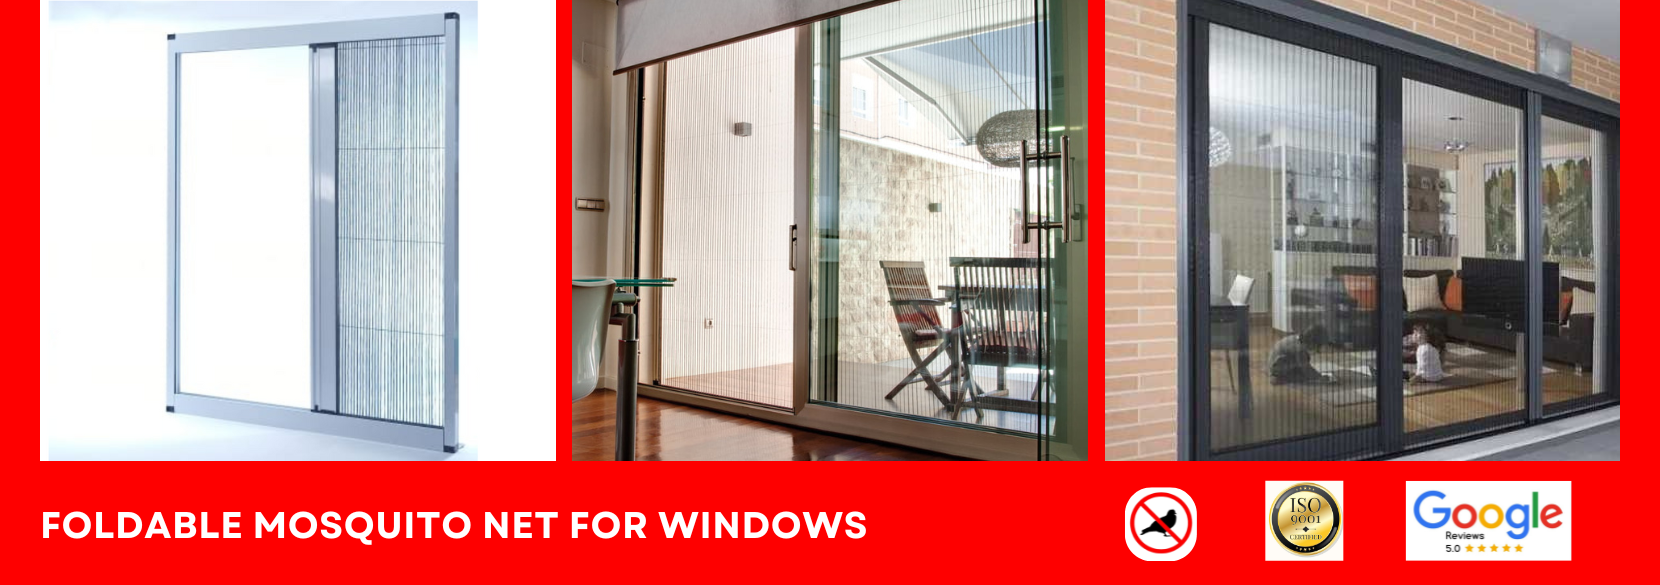 Foldable Mosquito Net For Windows